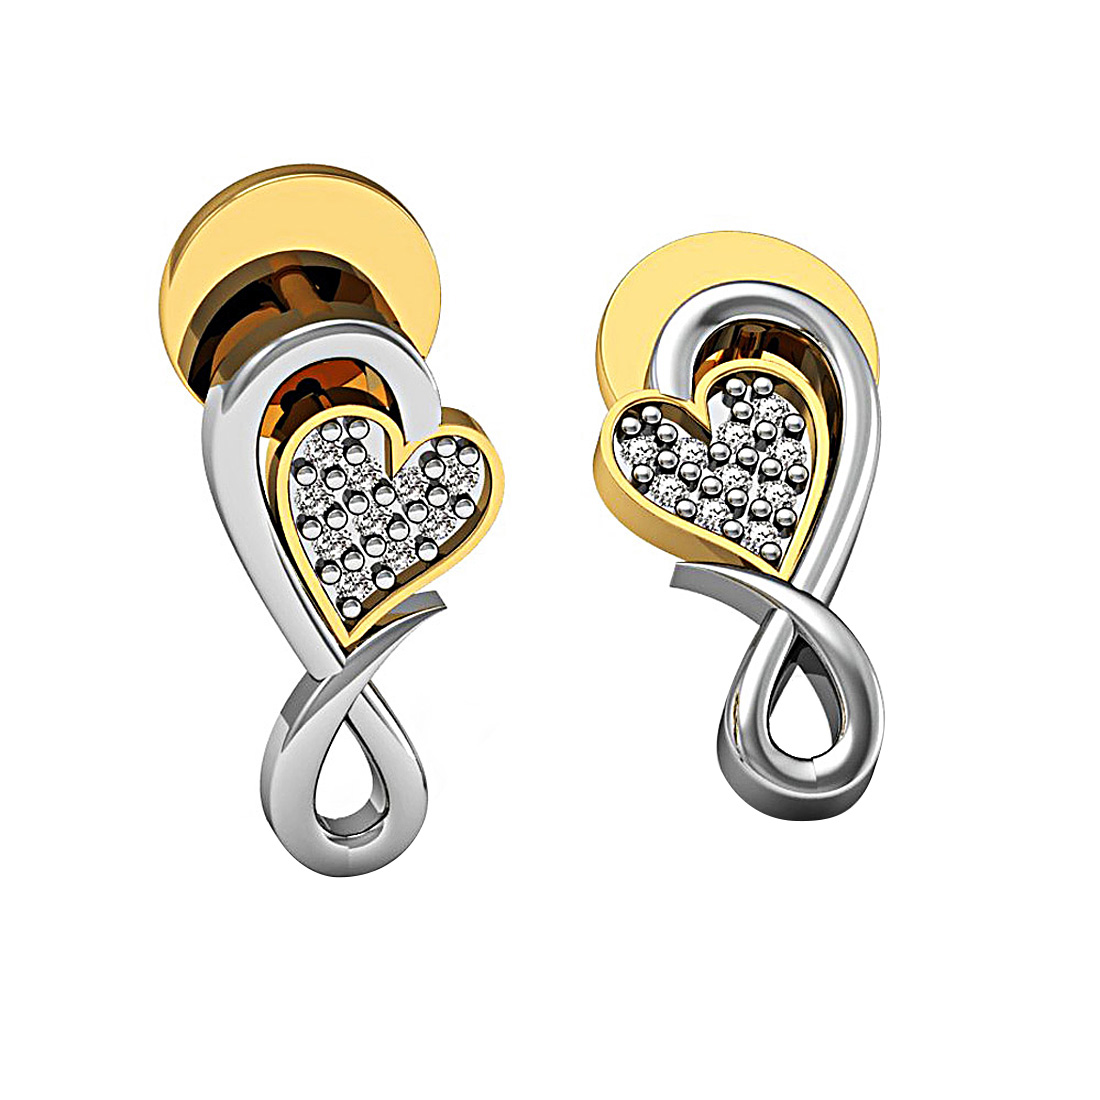 18k solid gold heart shape stud earrings with real diamond